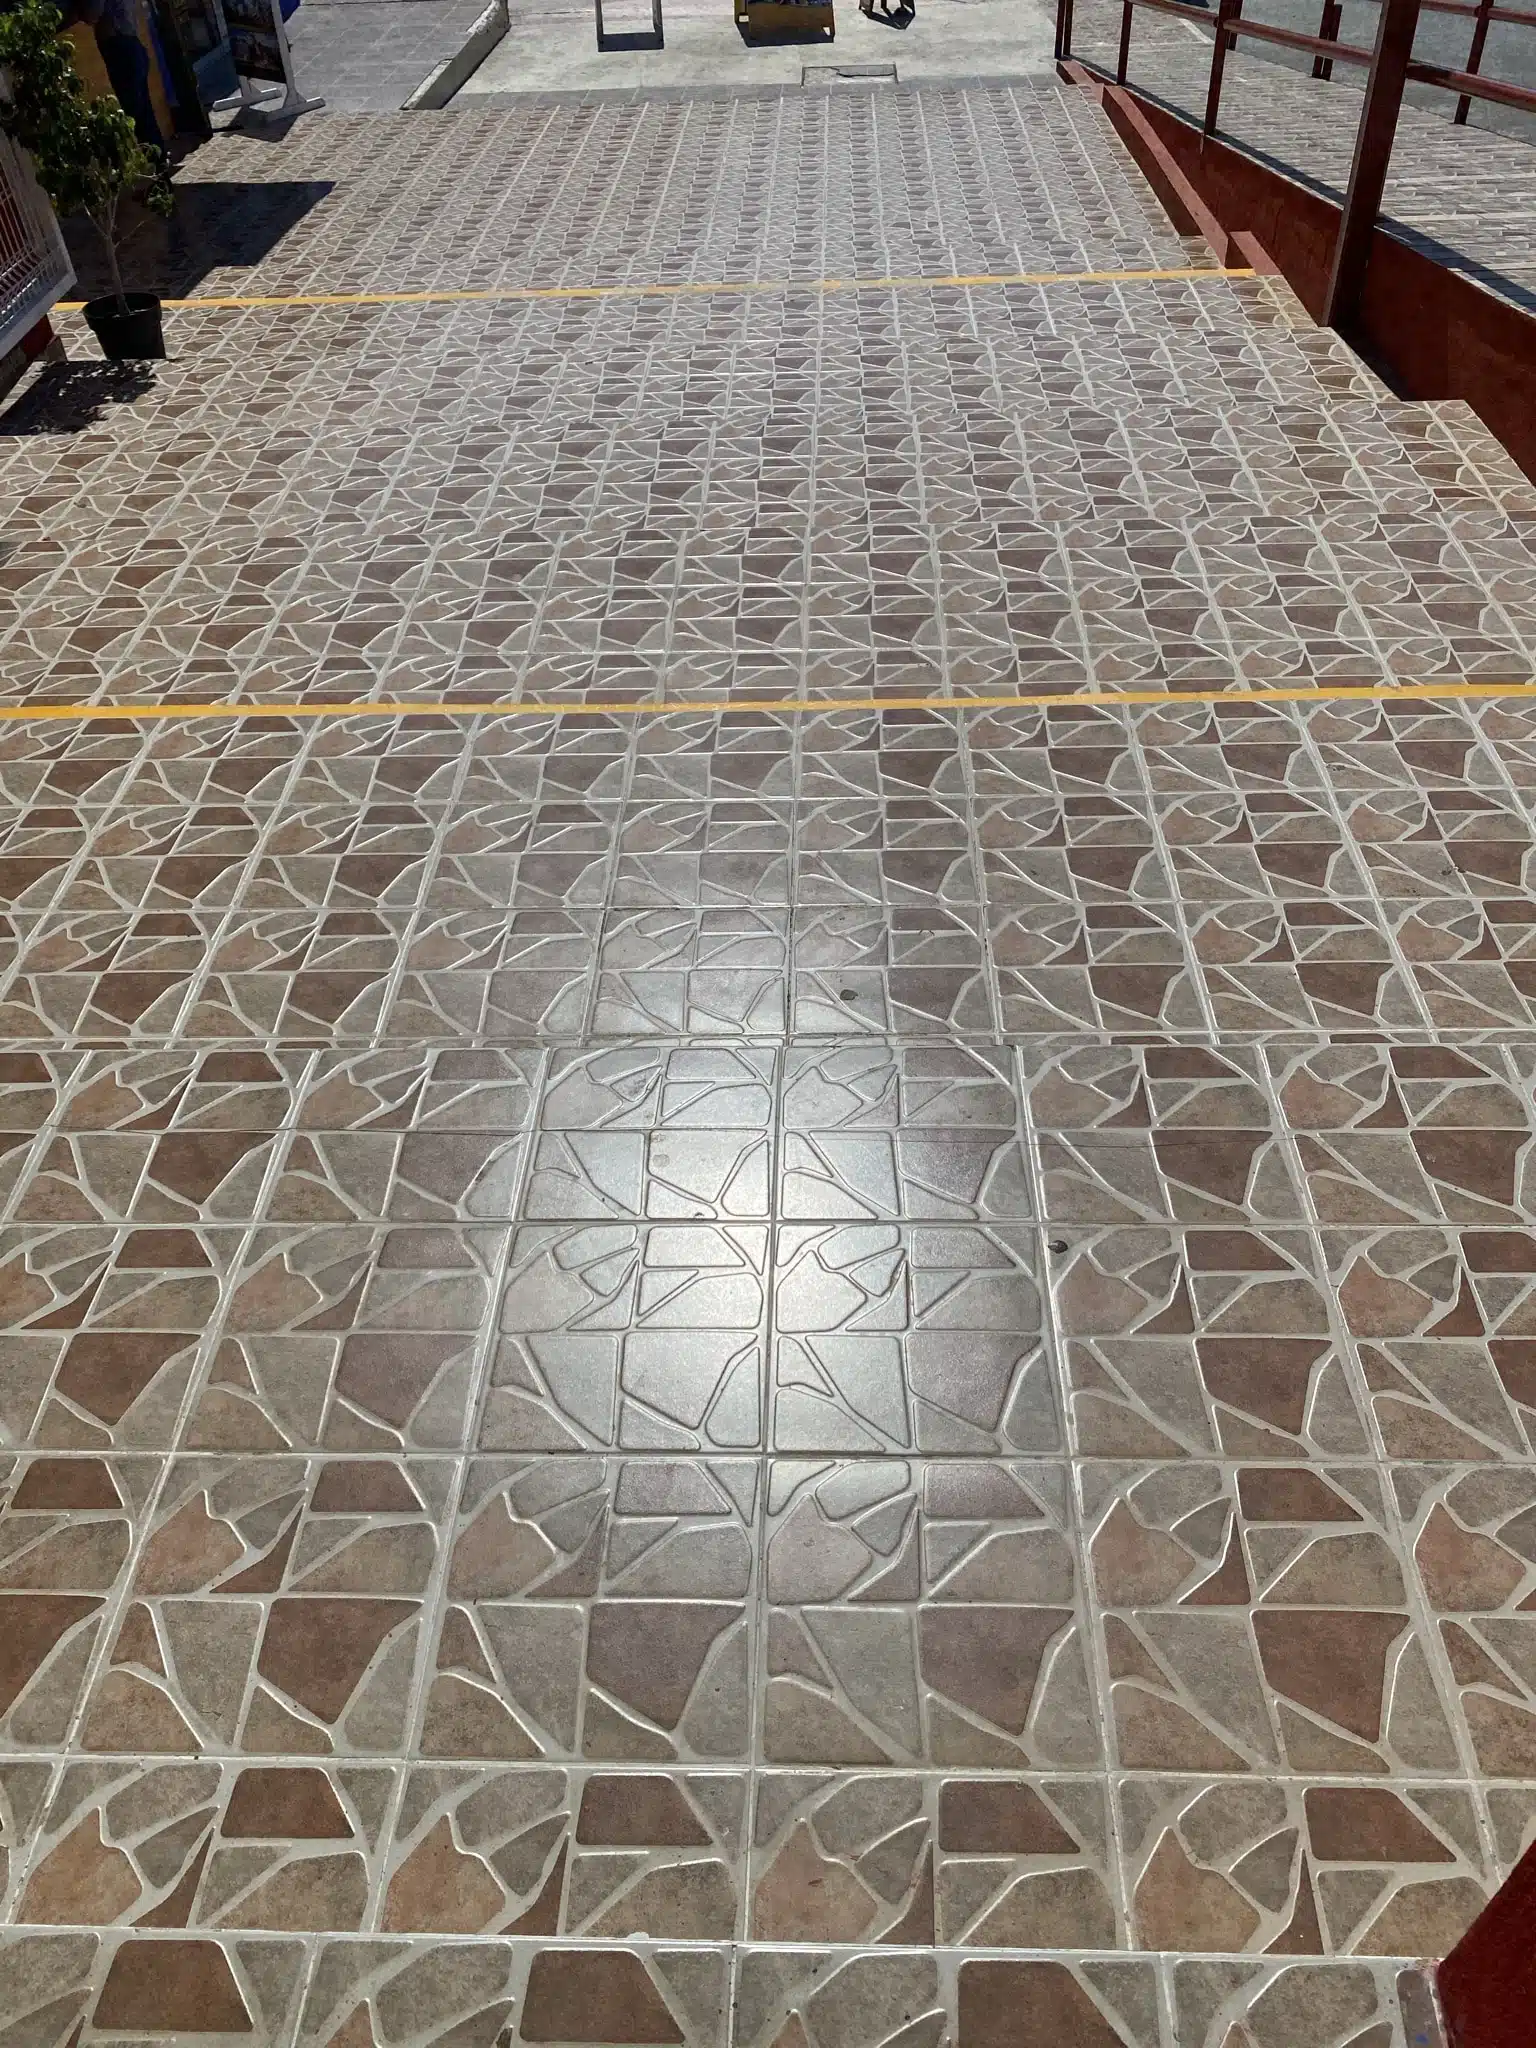 Image of a tiled floor connected to an article on how to improve the safety of your floors